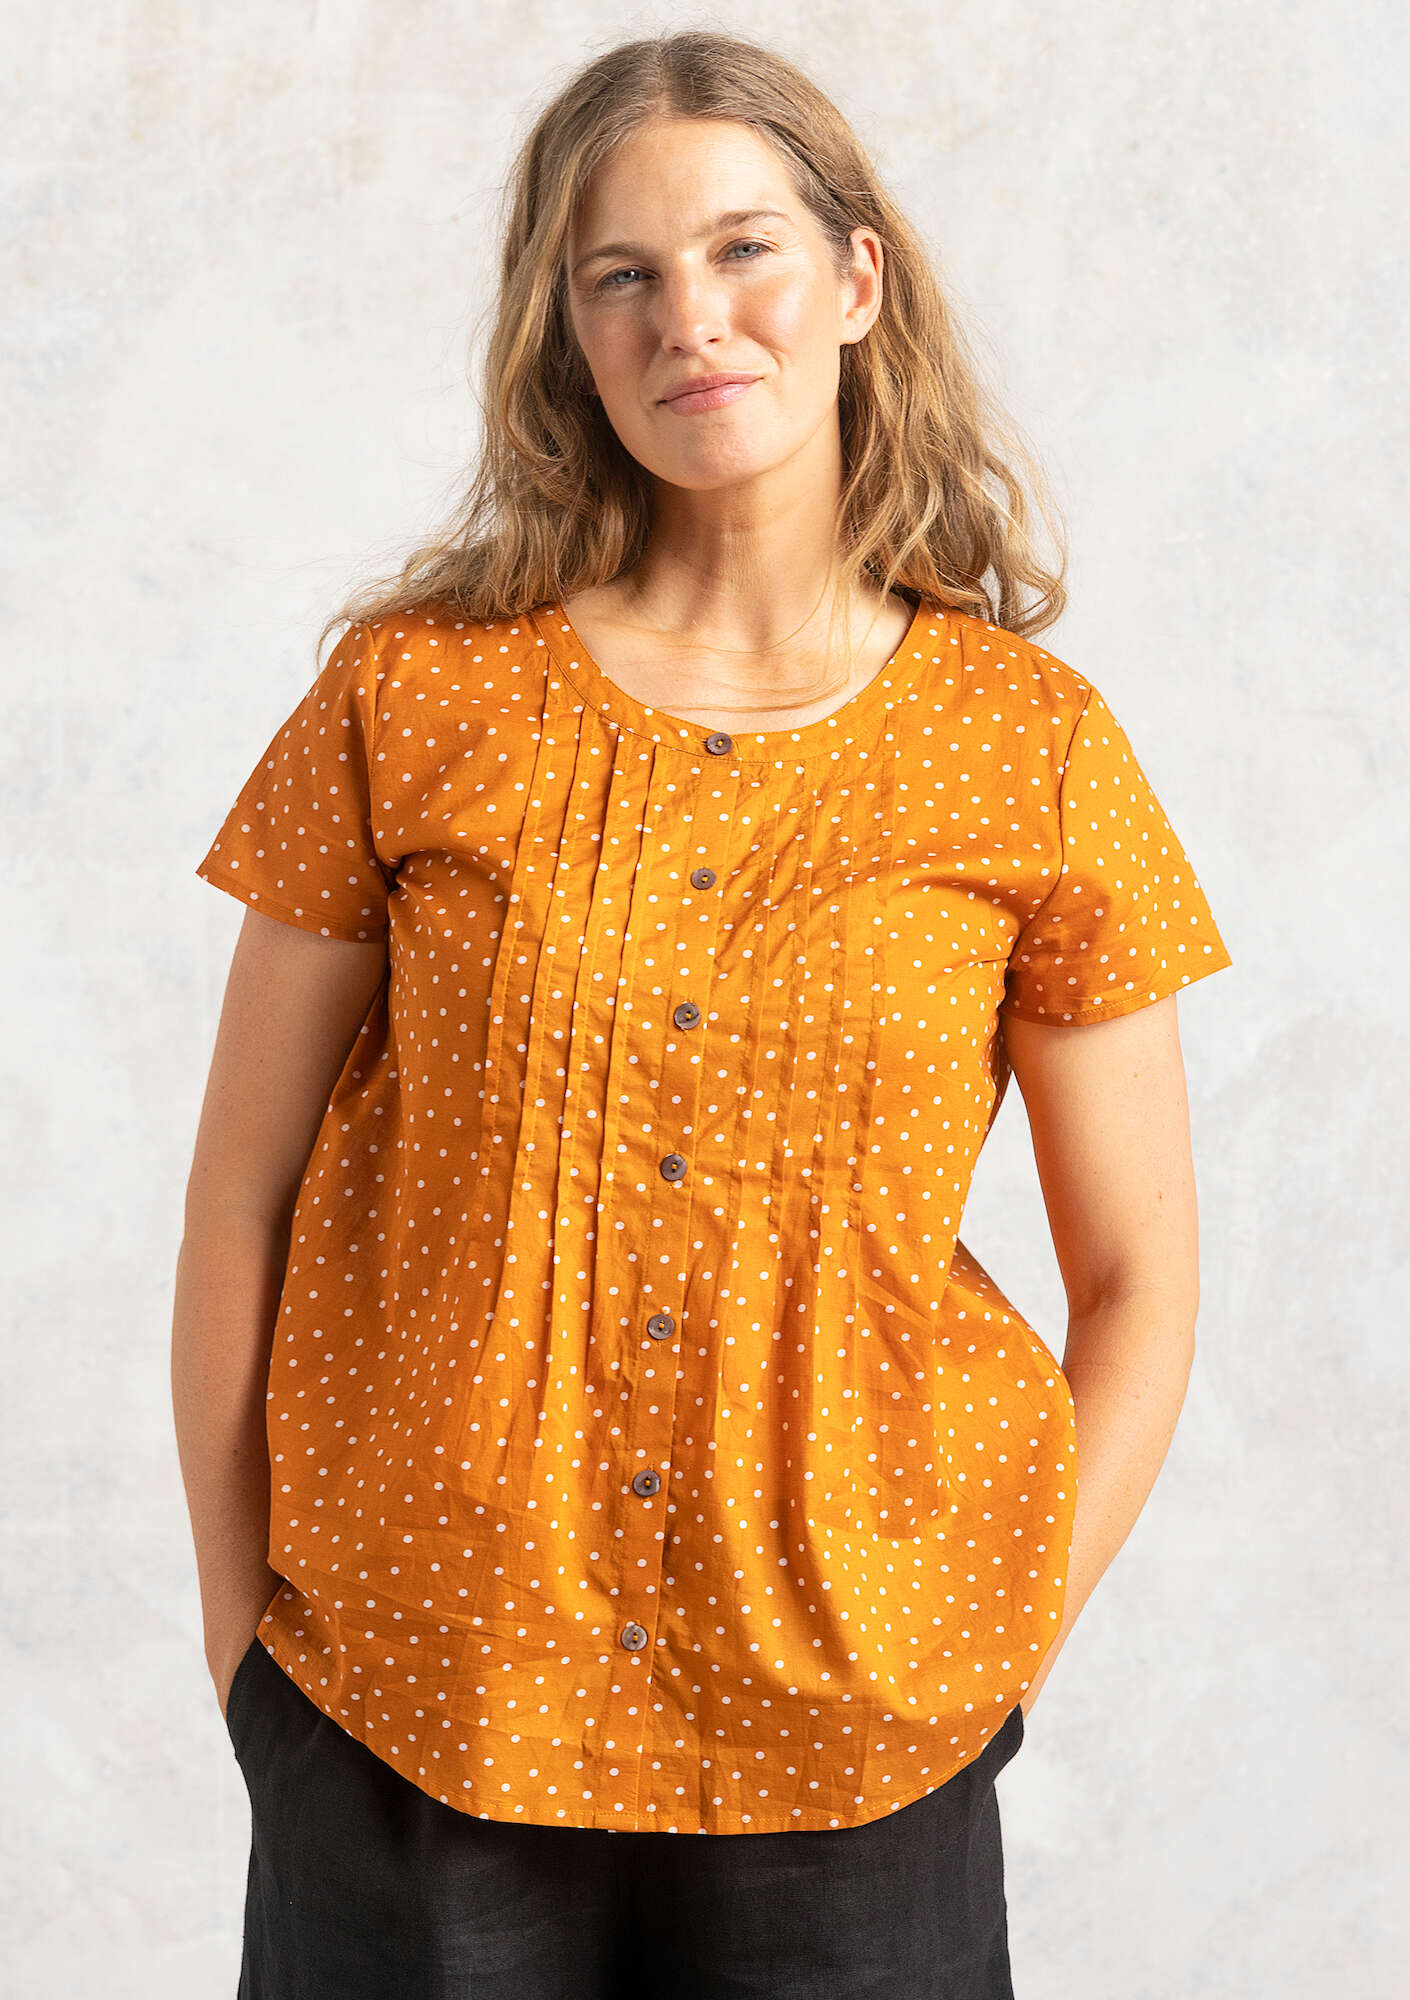 Short-sleeve “Pytte” blouse in organic cotton amber/patterned